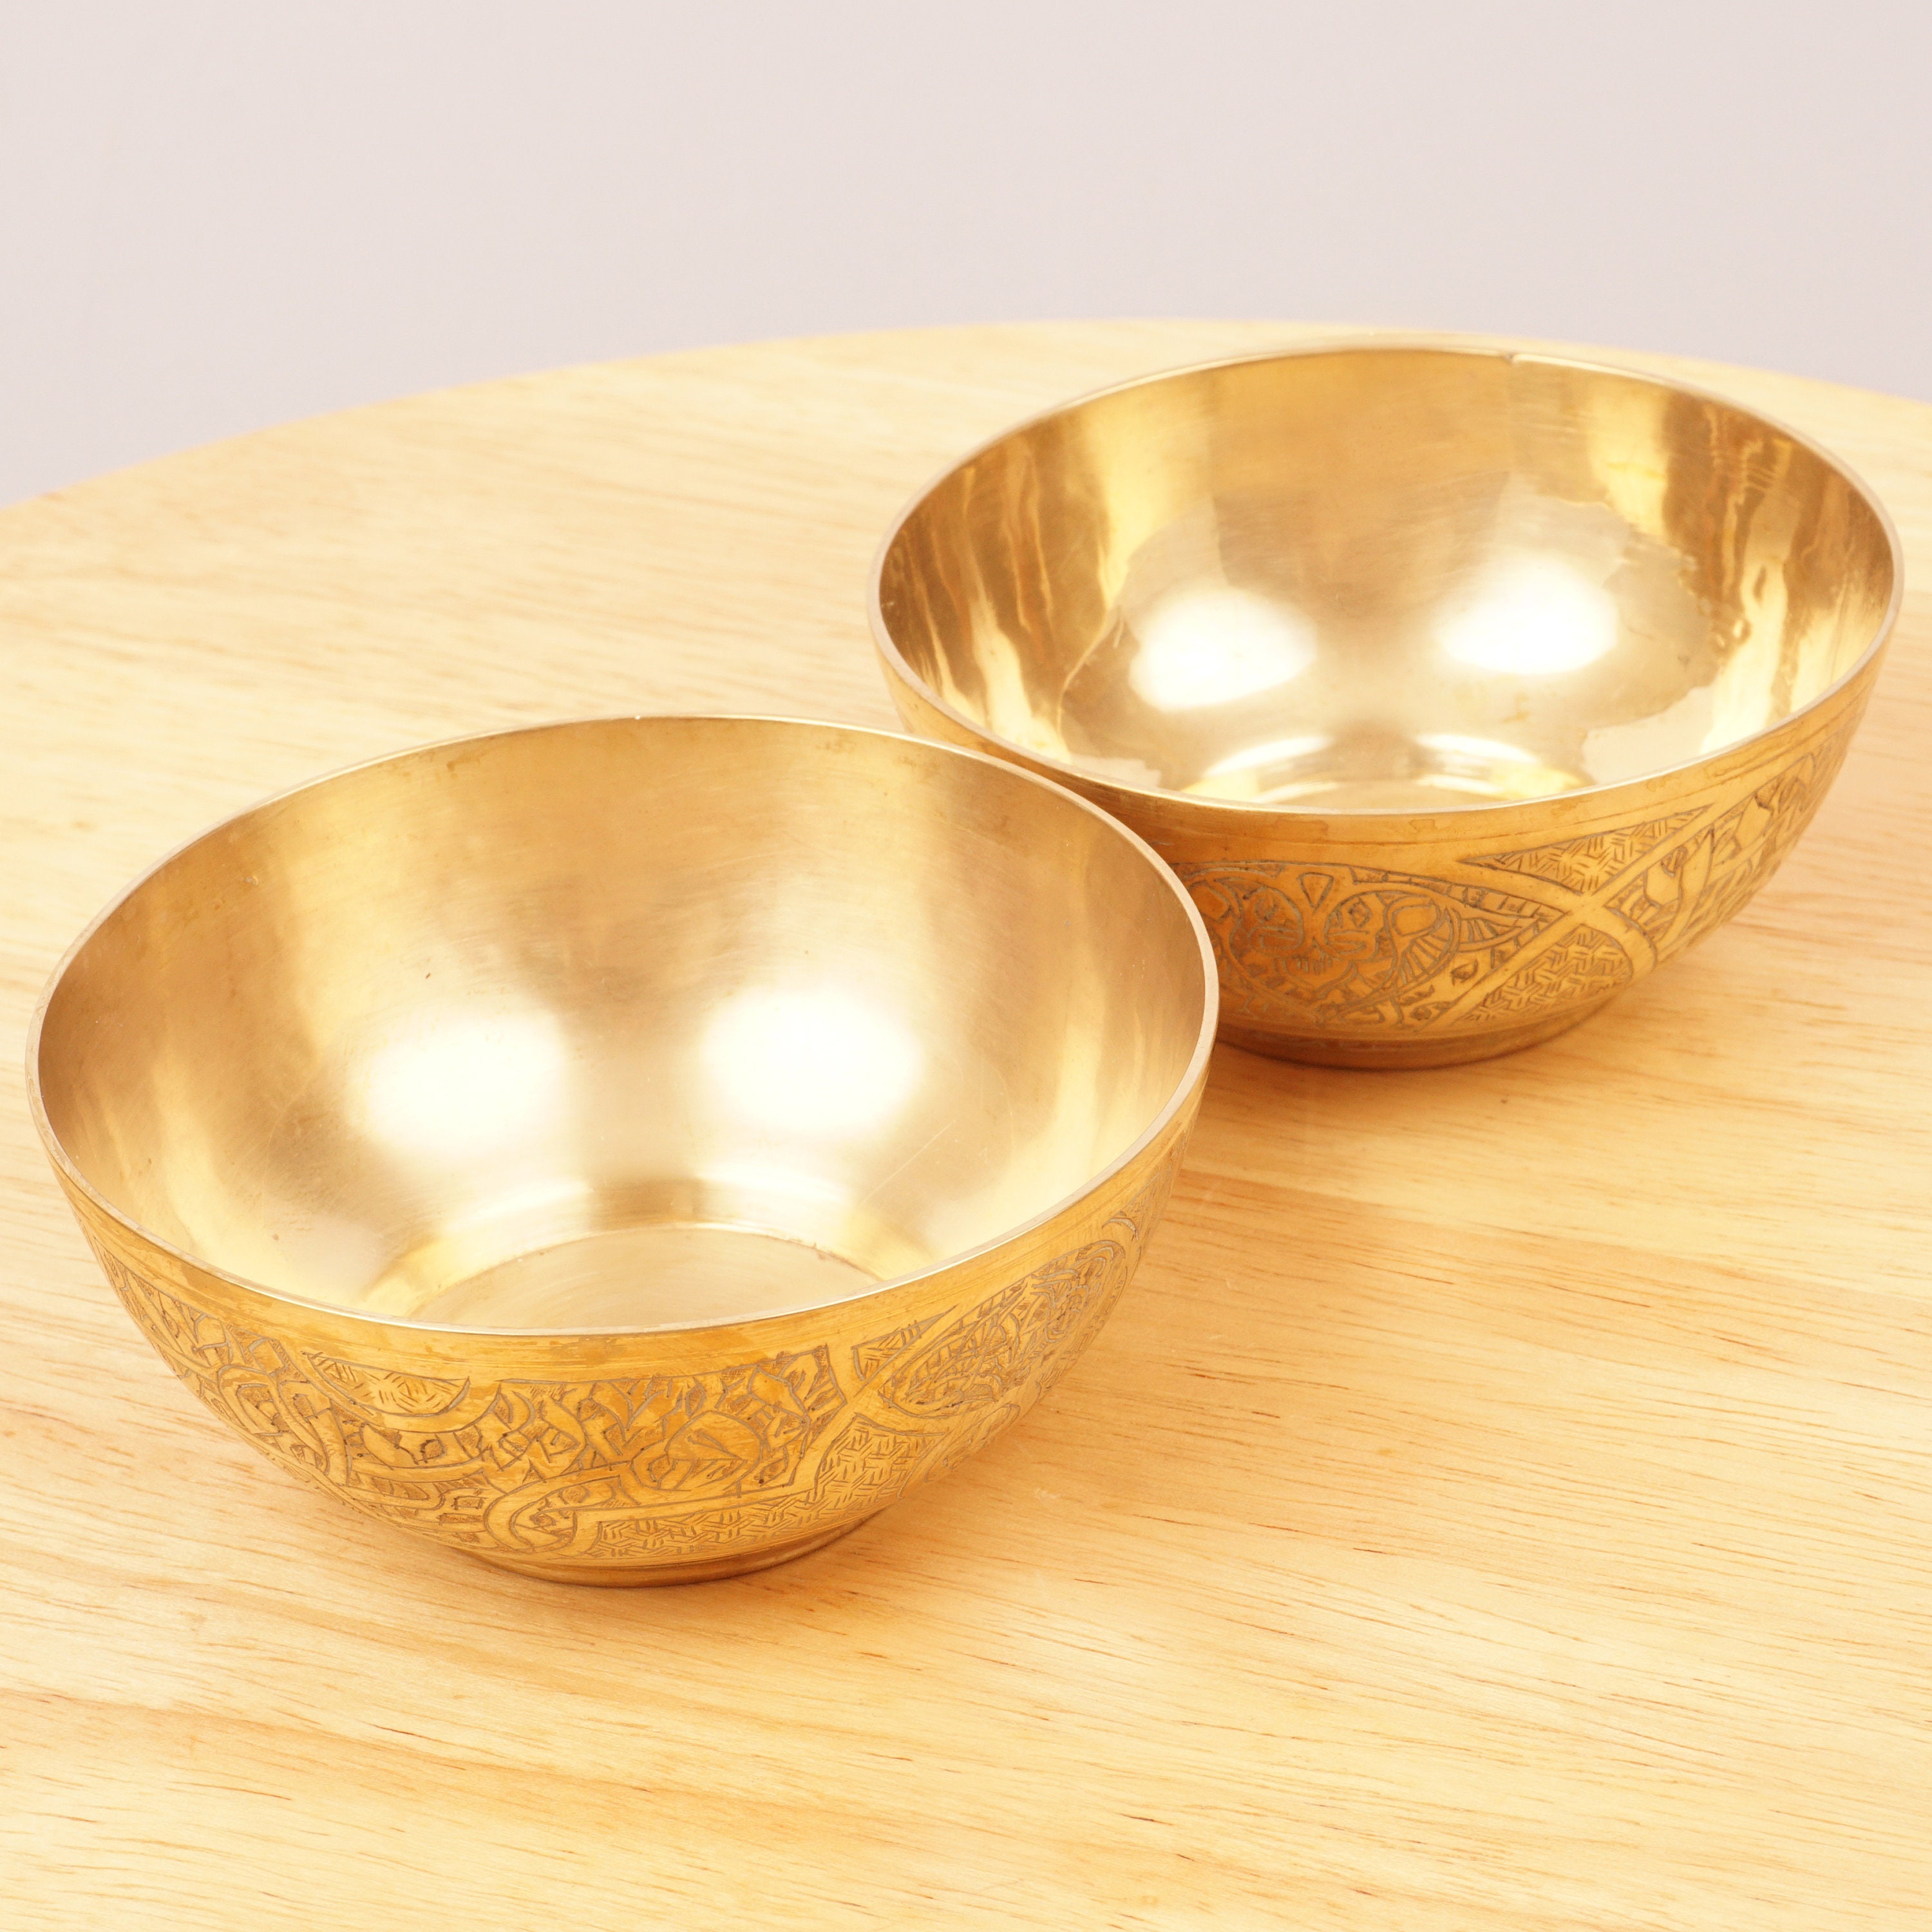 Set of two solid brass bowls with engraved pattern and Arabic characters